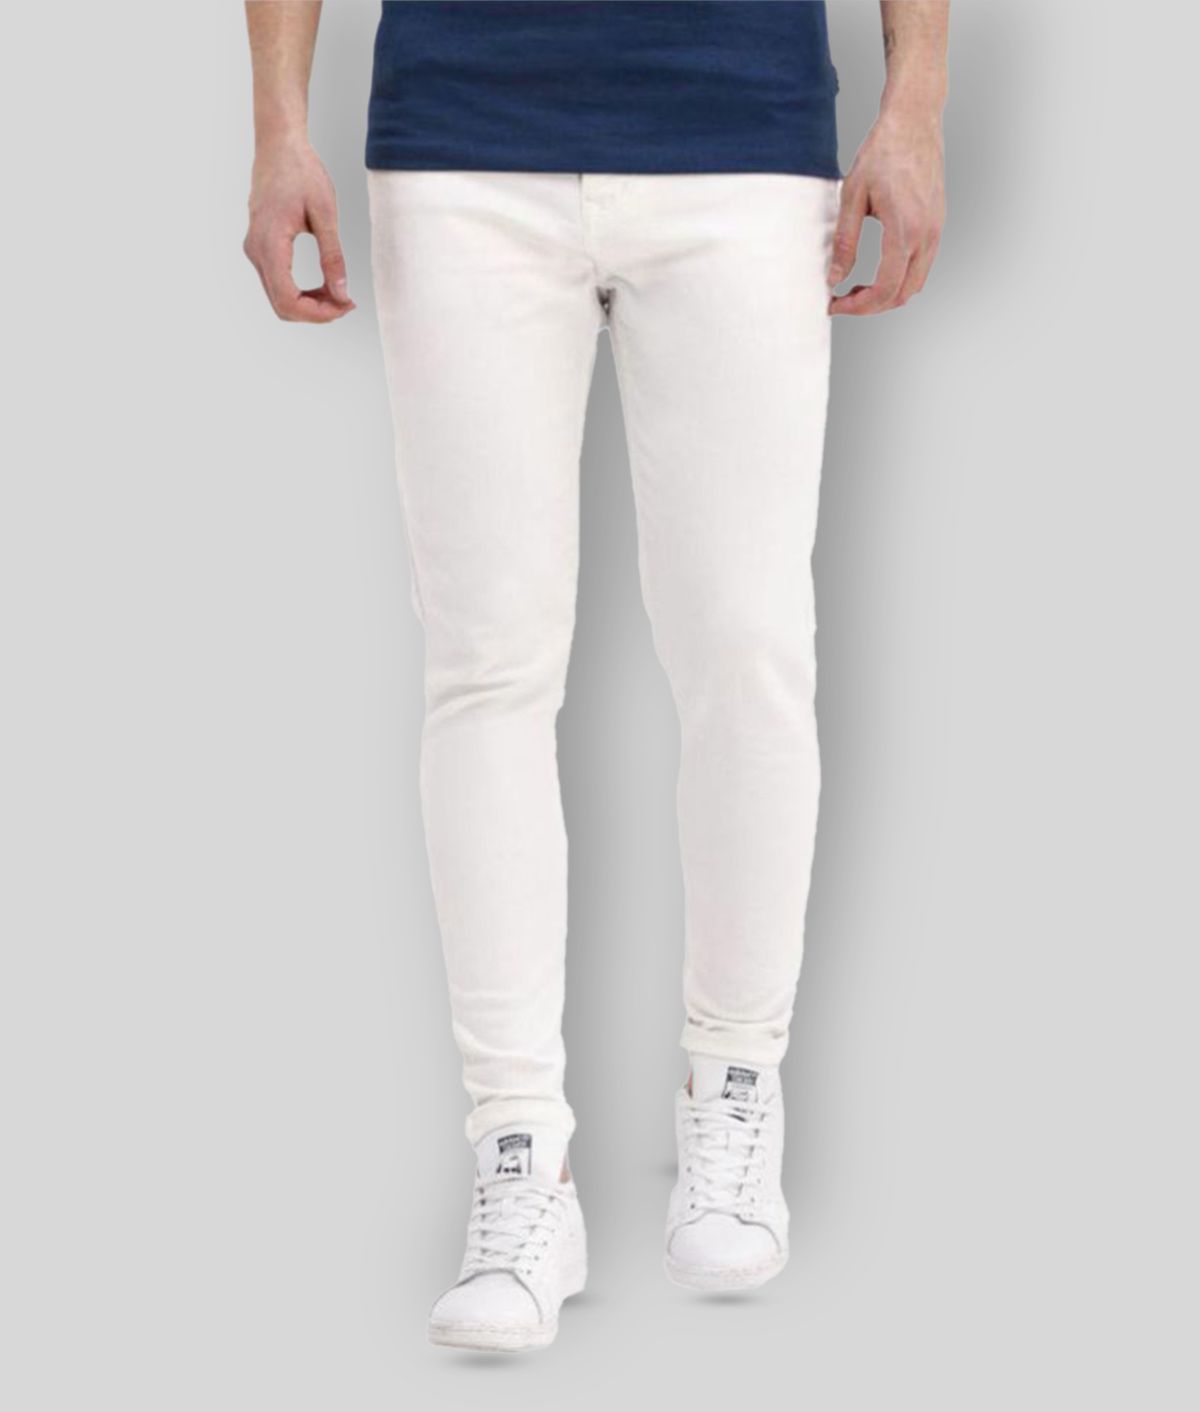     			x20 - White 100% Cotton Slim Fit Men's Jeans ( Pack of 1 )